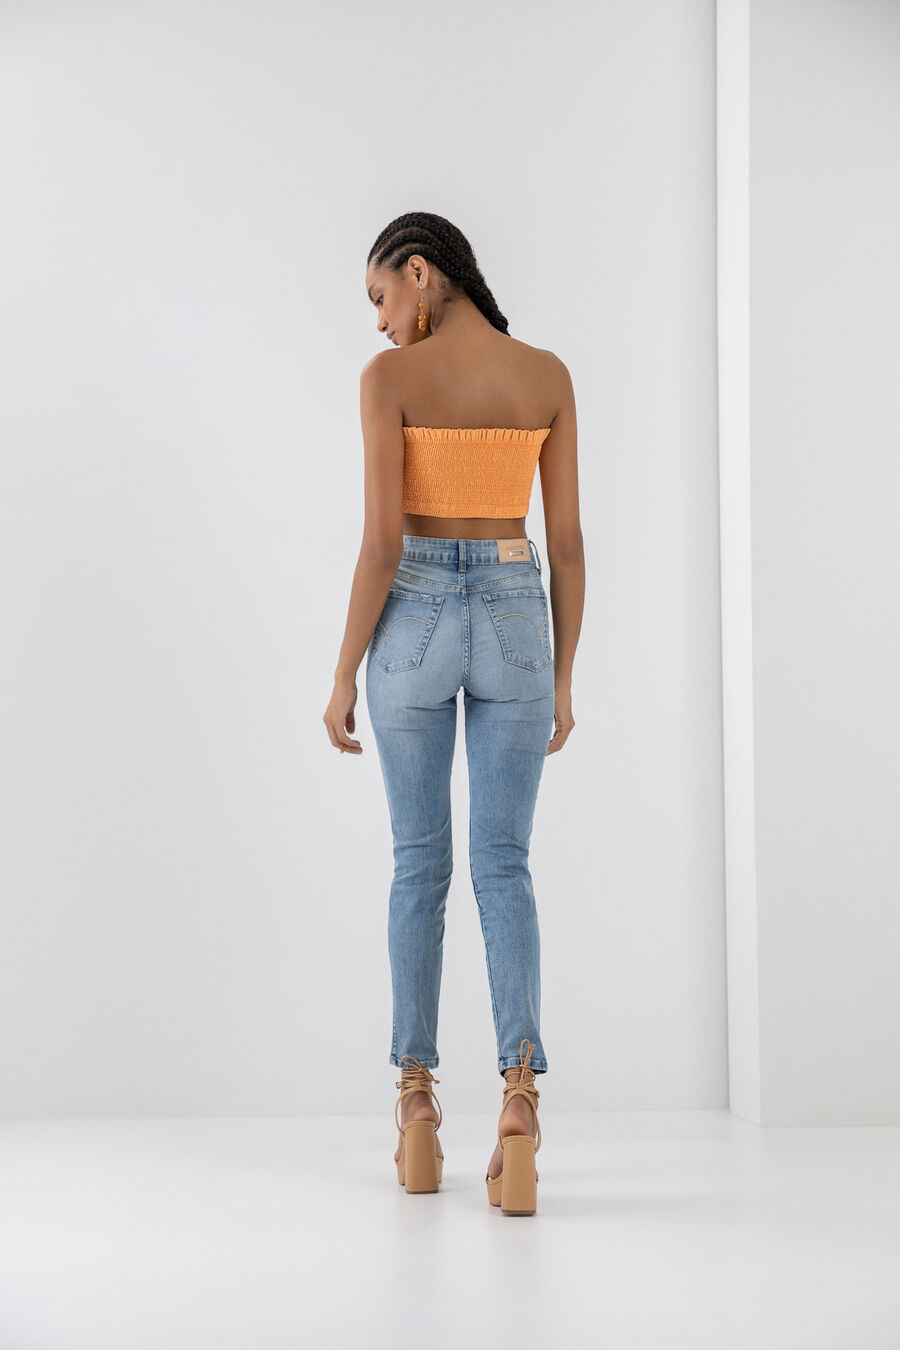 Calça Jeans Skinny Cropped Every Day, JEANS, large.